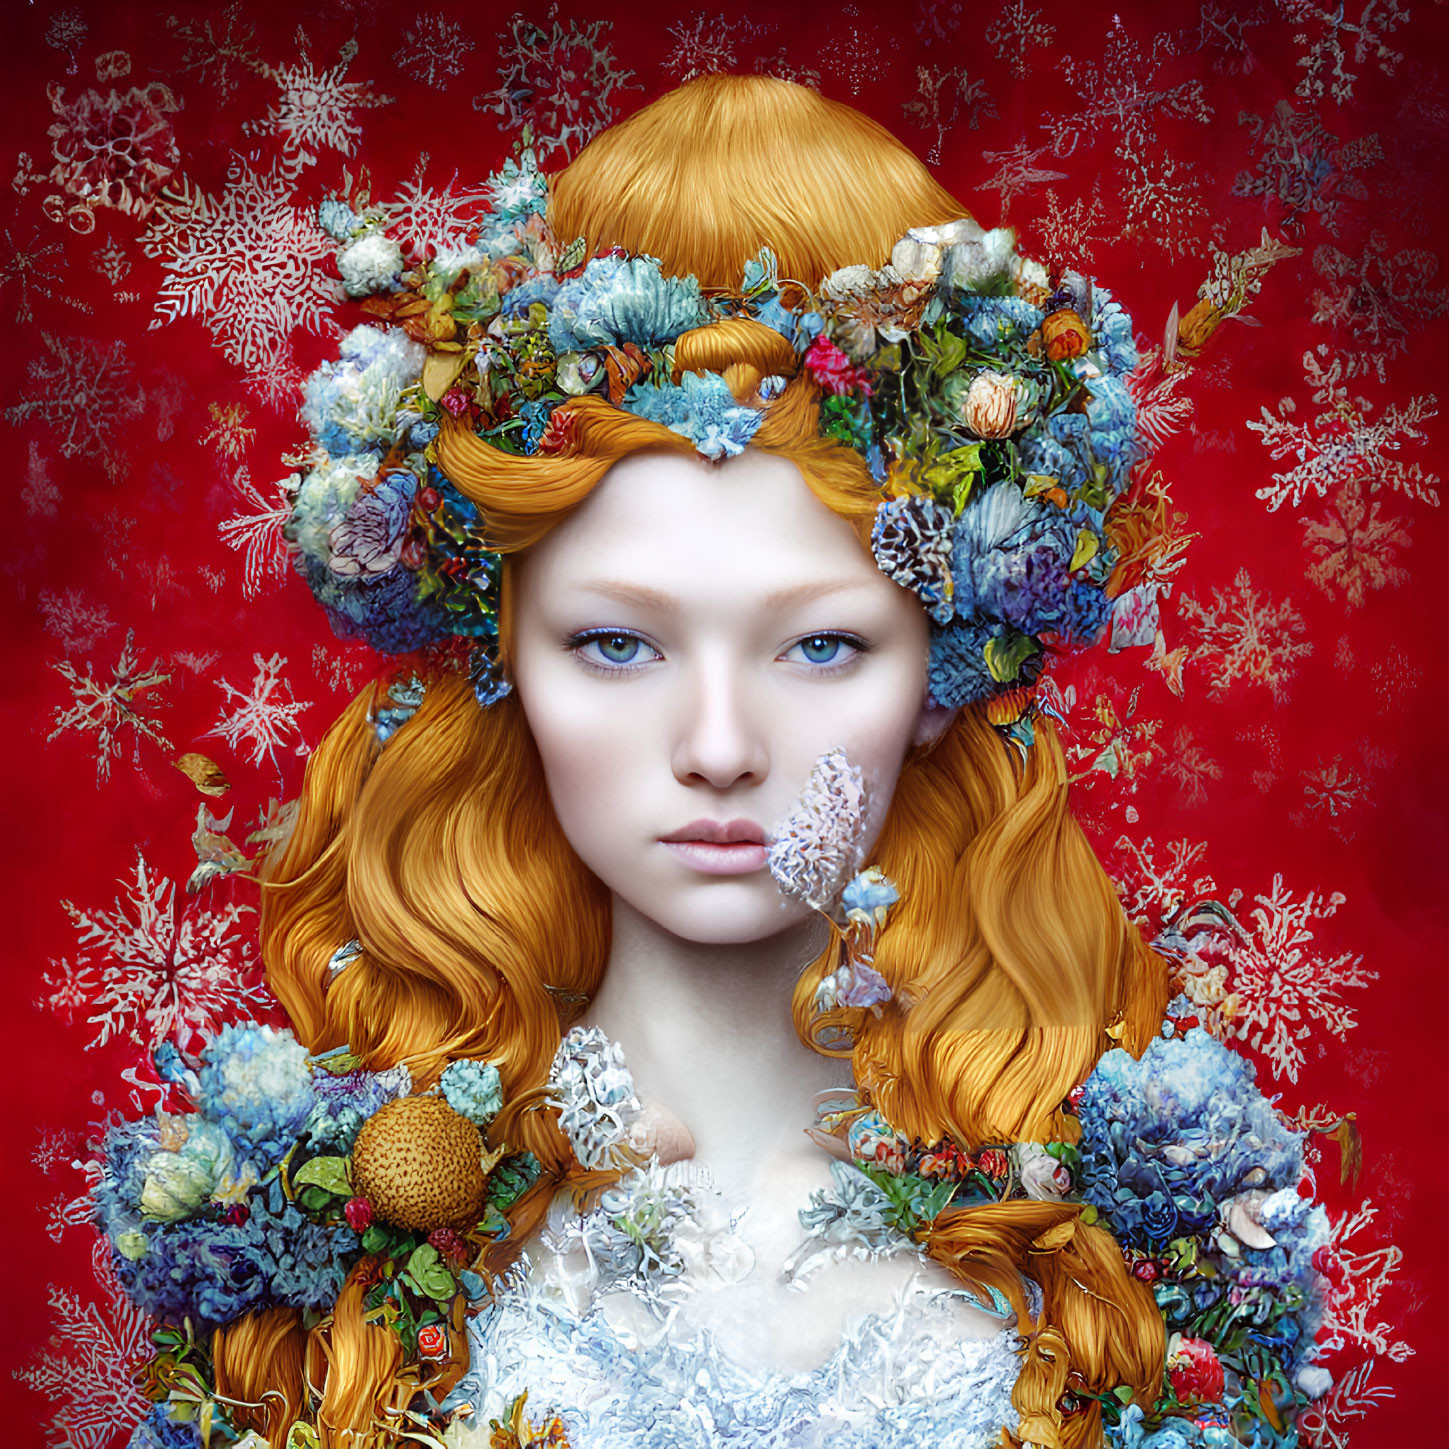 Vibrant red-haired woman with flower crown on red background with snowflakes